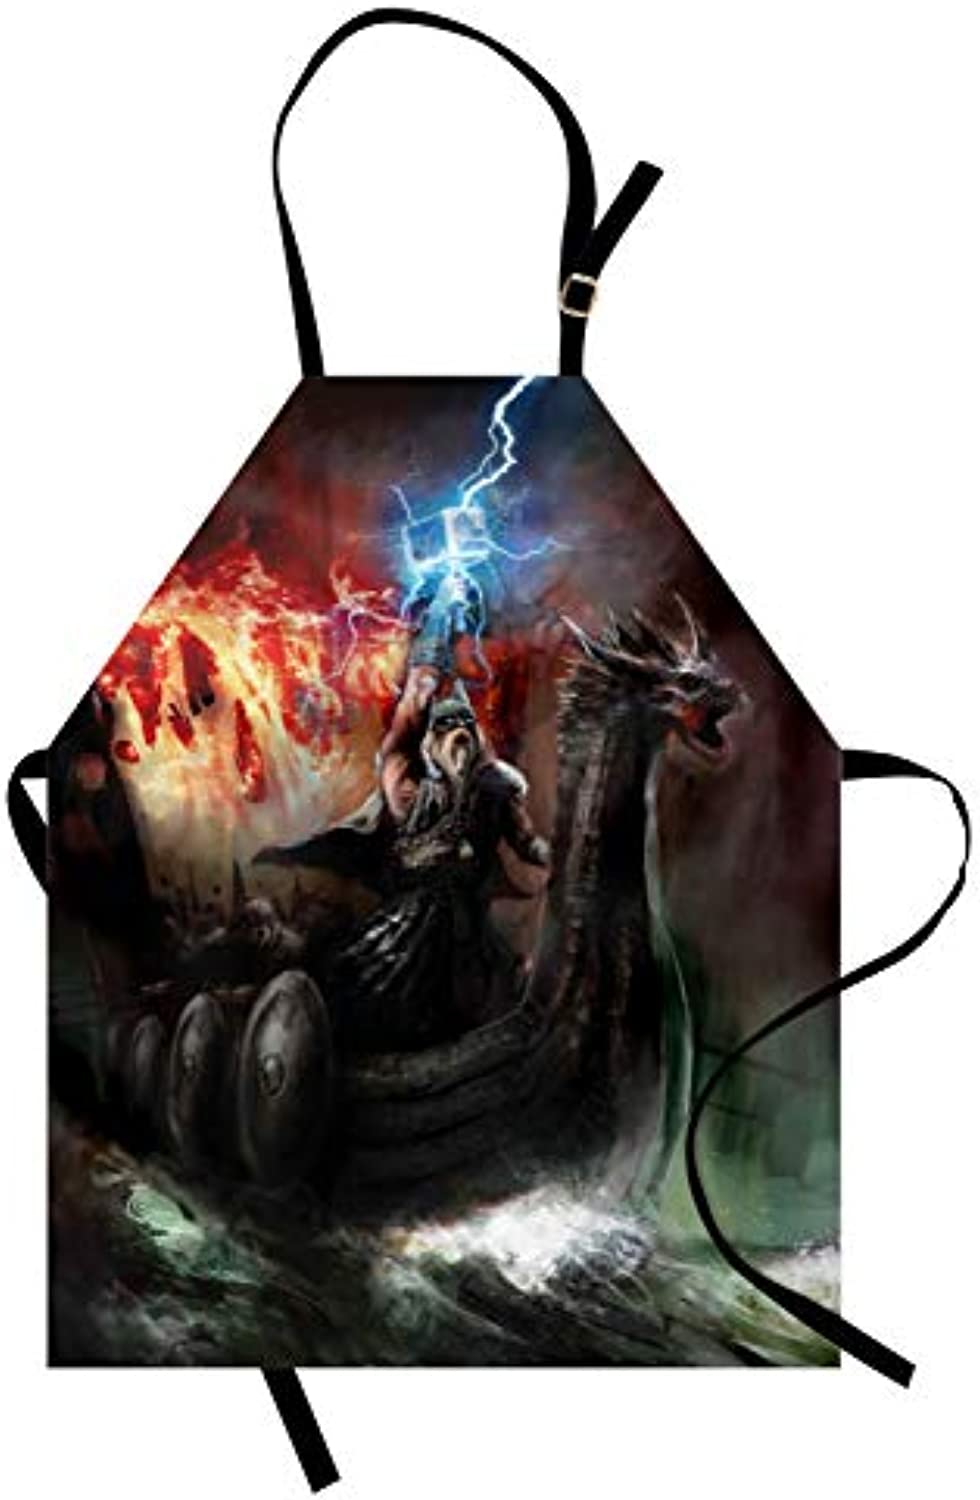 Granbey Dragon Apron  Imaginary Wrath of Vikings Royal Boat Animal Head Storm Rays  Unisex Kitchen Bib with Adjustable Neck for Cooking Gardening  Adult Size  Charcoal Red